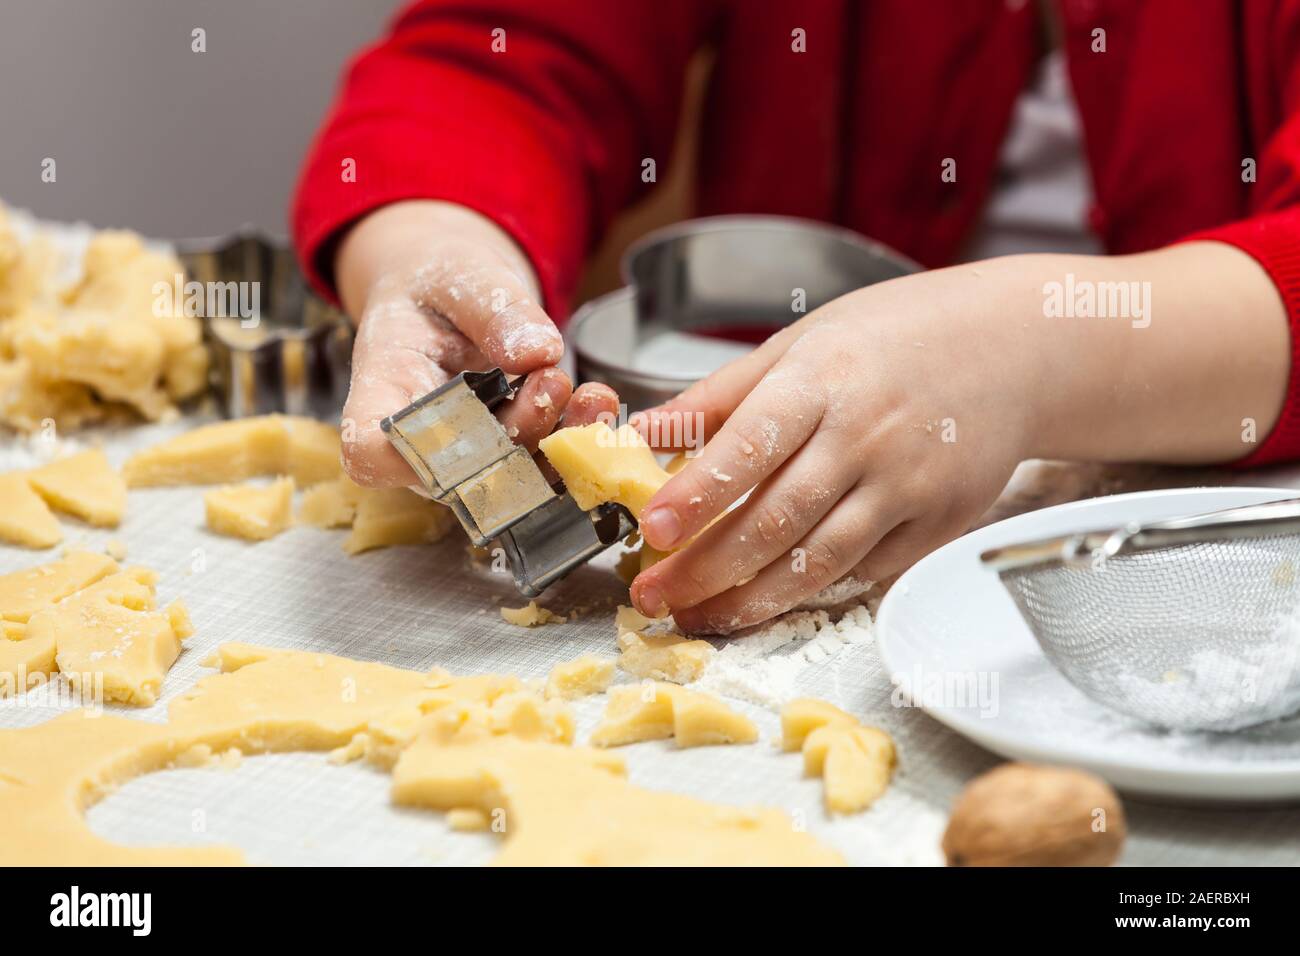 Child cuts out cookies from dough Stock Photo